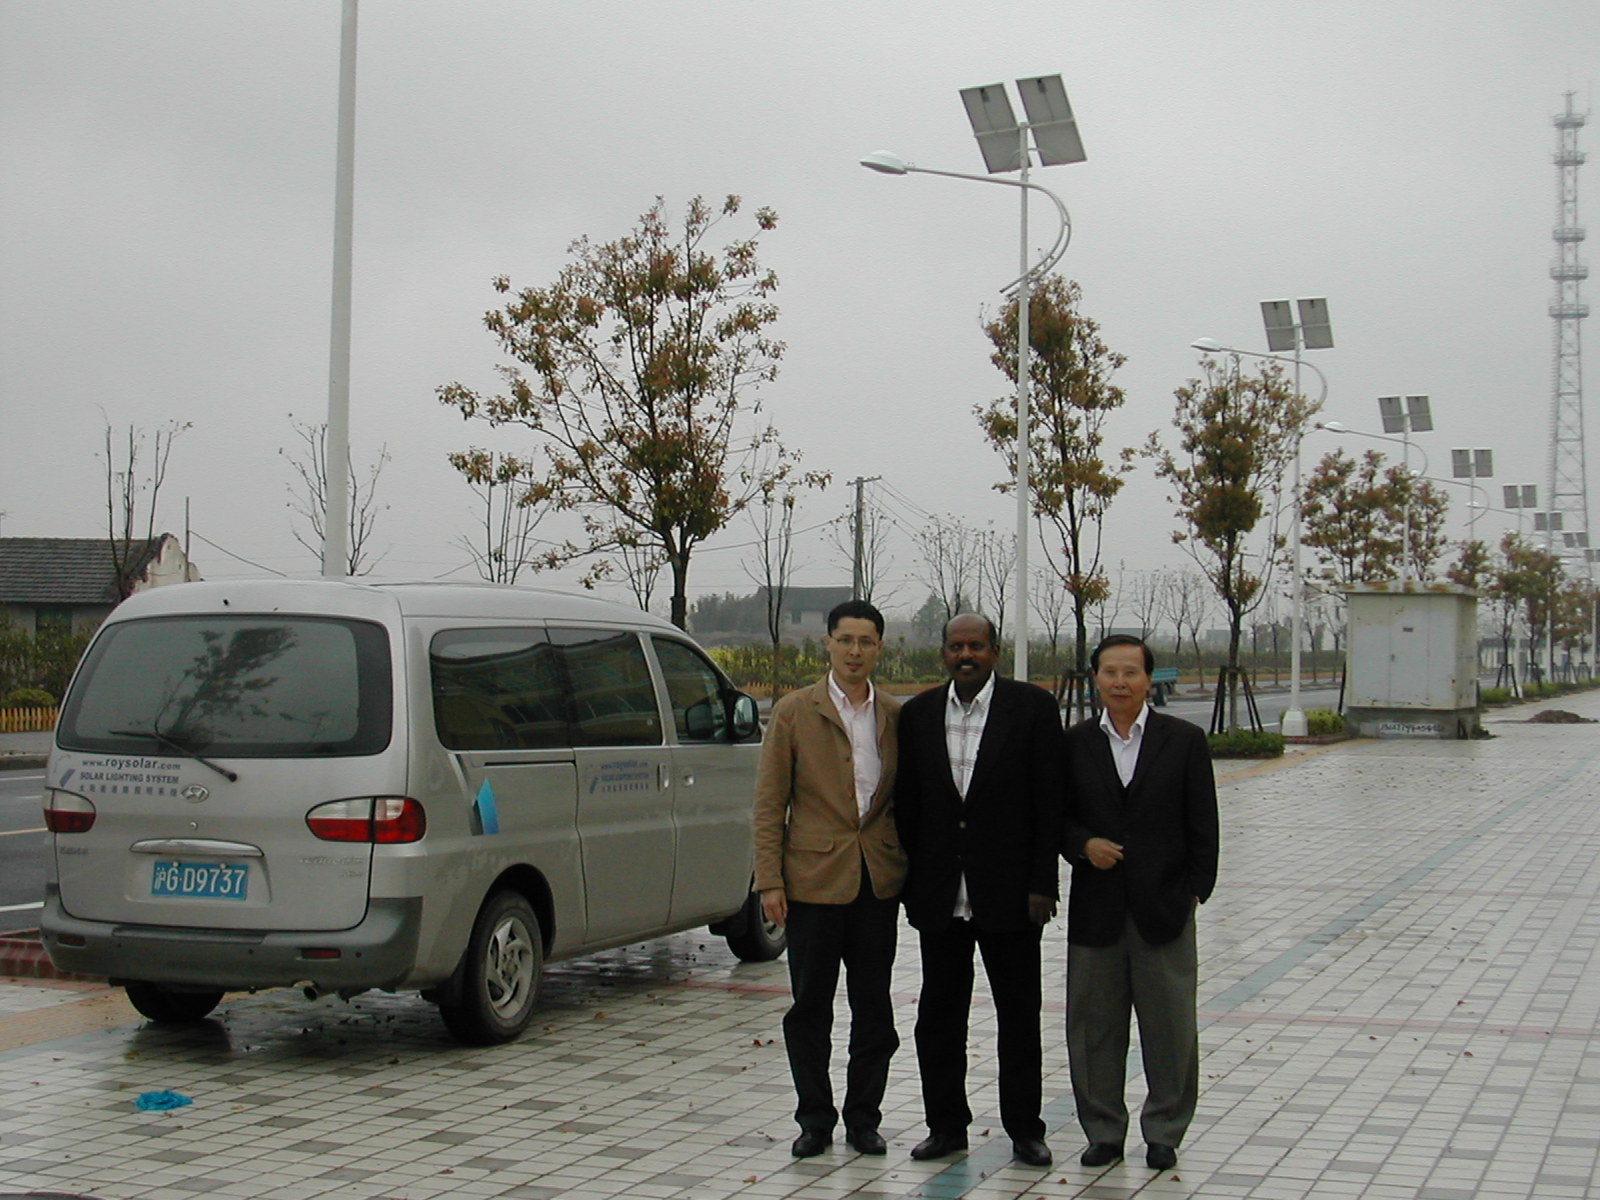 Mr. Mohamed El Hadie from Sudan visits our solar s